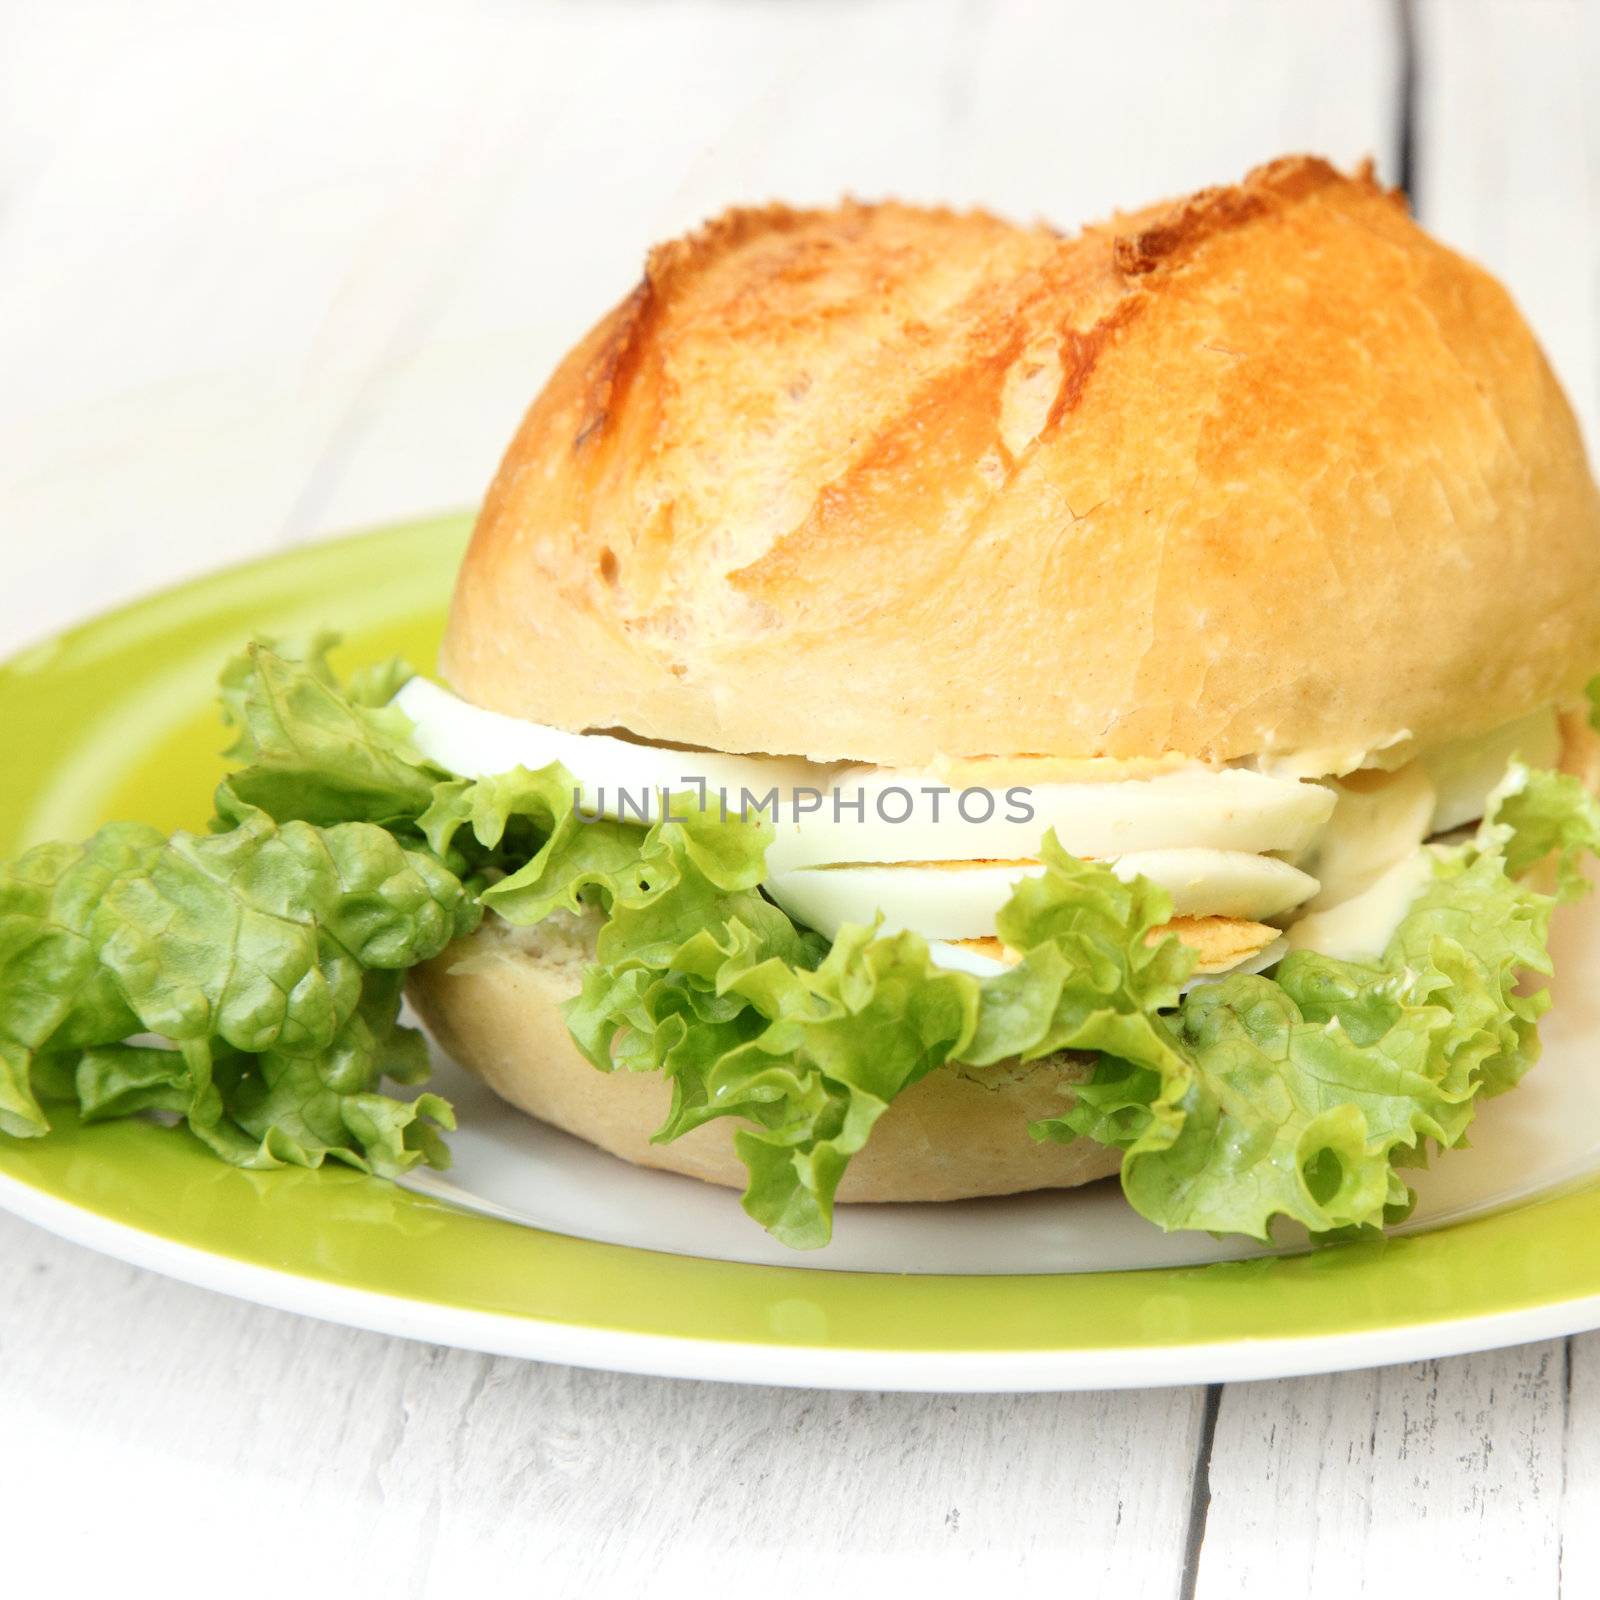 Crisp fresh golden crusty bun with a sliced hard boiled egg and lettuce filling served as a healthy snack on a green plate